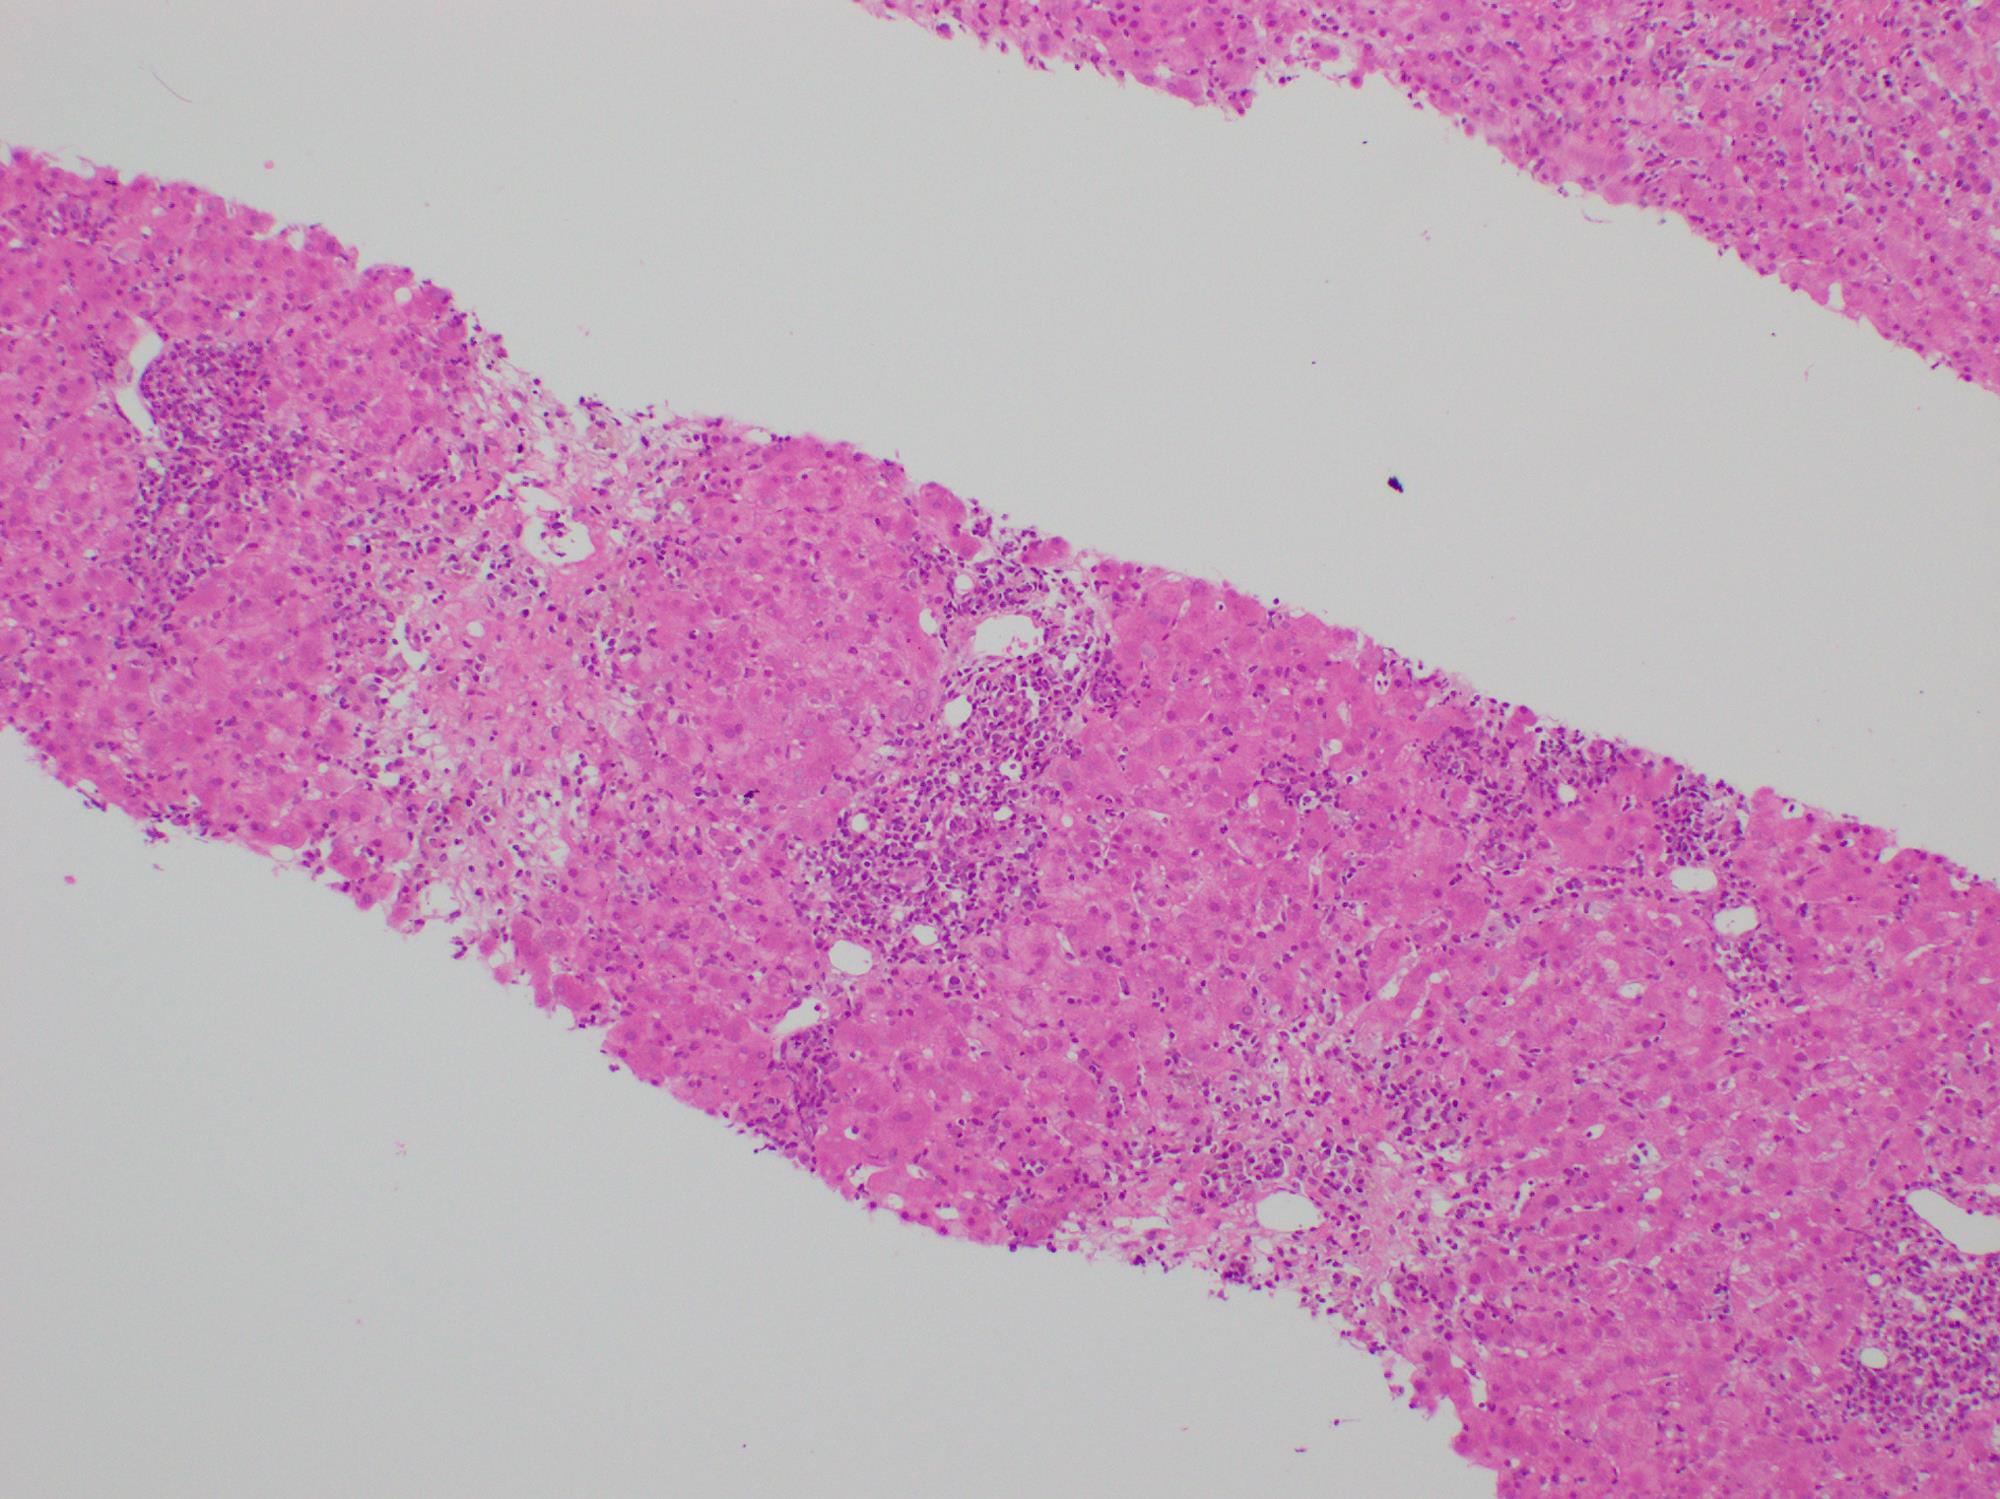 Both portal and lobular regions demonstrate a mixed inflammatory infiltrate with abundant plasma cells.